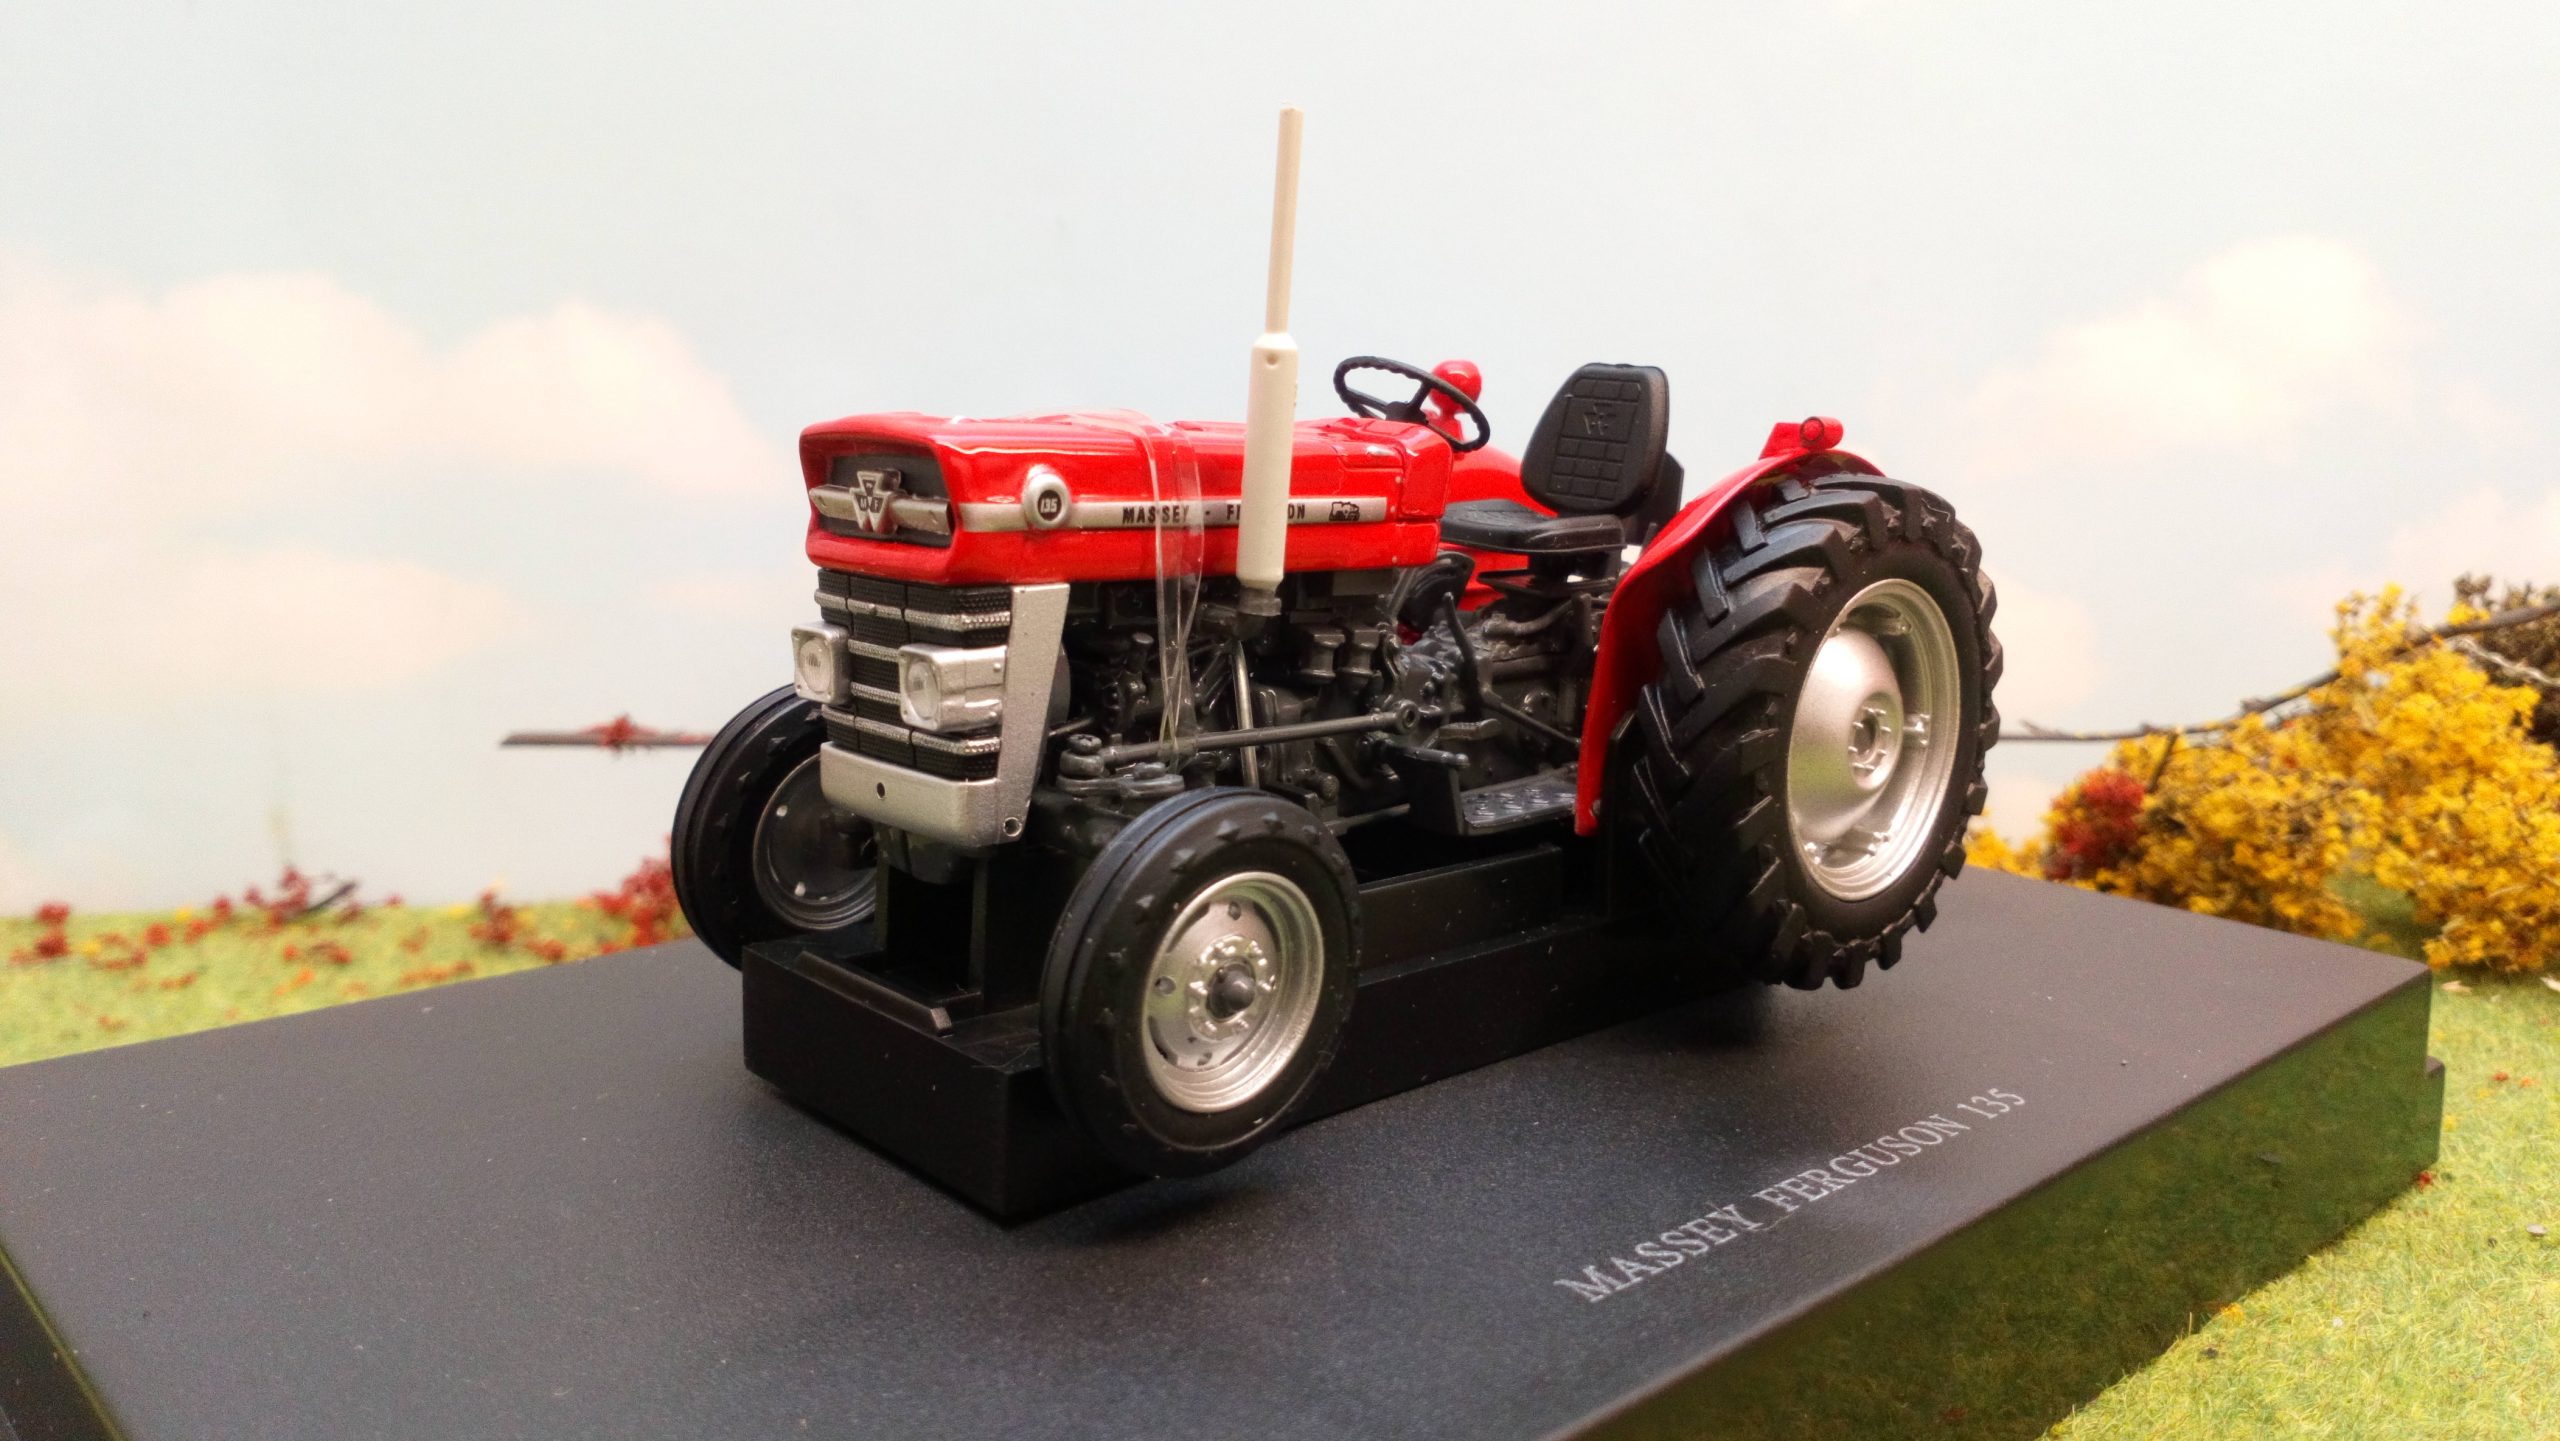 UNIVERSAL HOBBIES 5292 1:32 SCALE MASSEY FERGUSON 135 WITH RED SIROCCO LIMITED